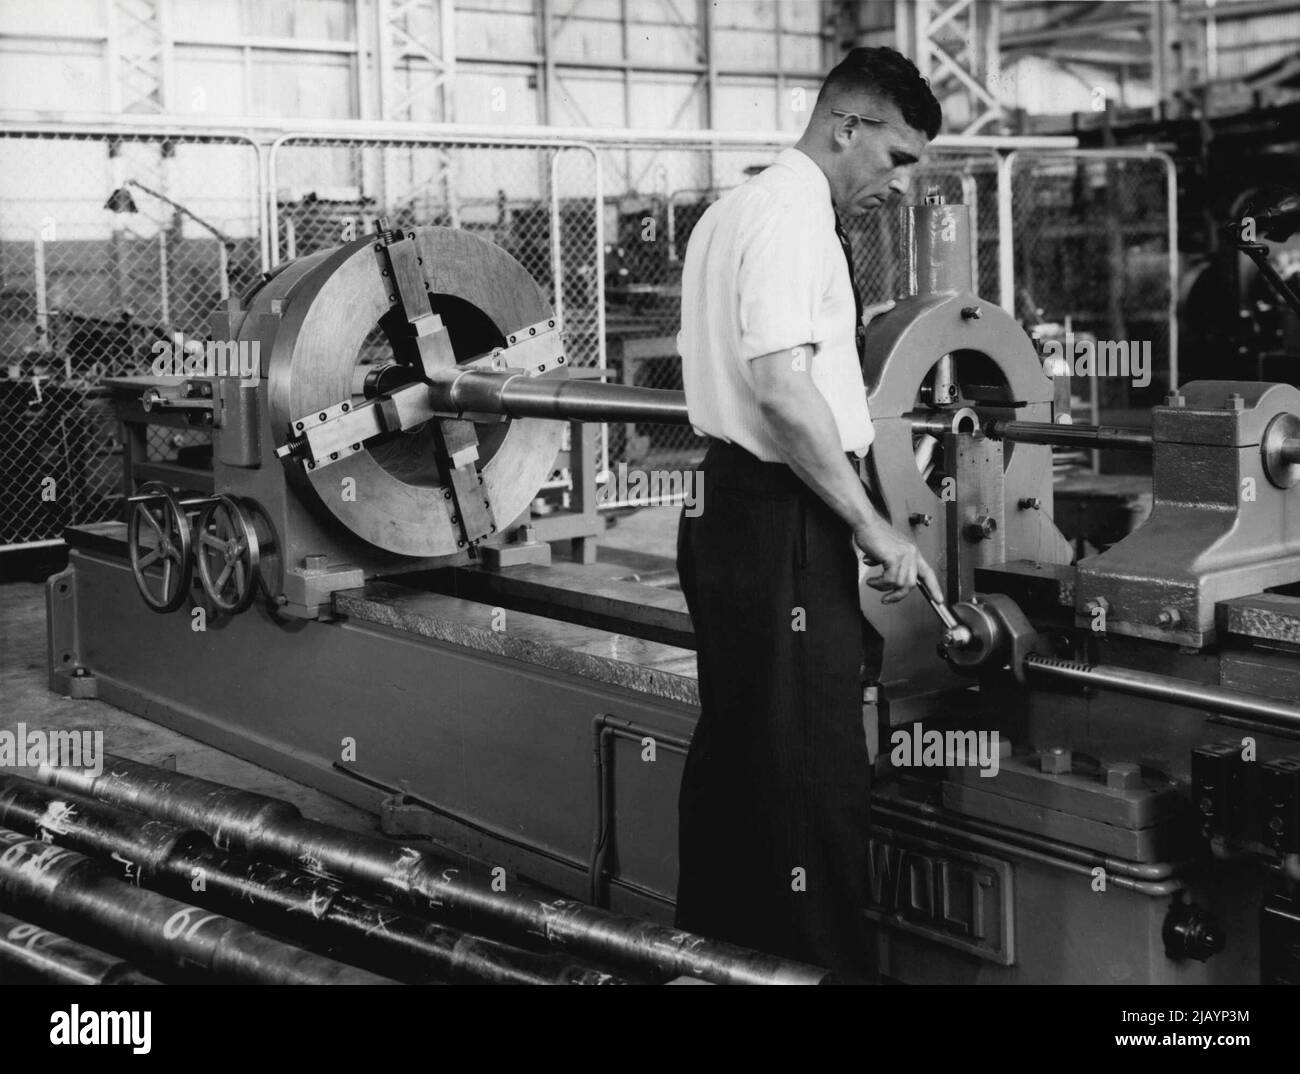 Rifling machine designed & built in Victoria. 2 Pounder anti-tank. July 1, 1941. (Photo by D. Darian Smith). Stock Photo